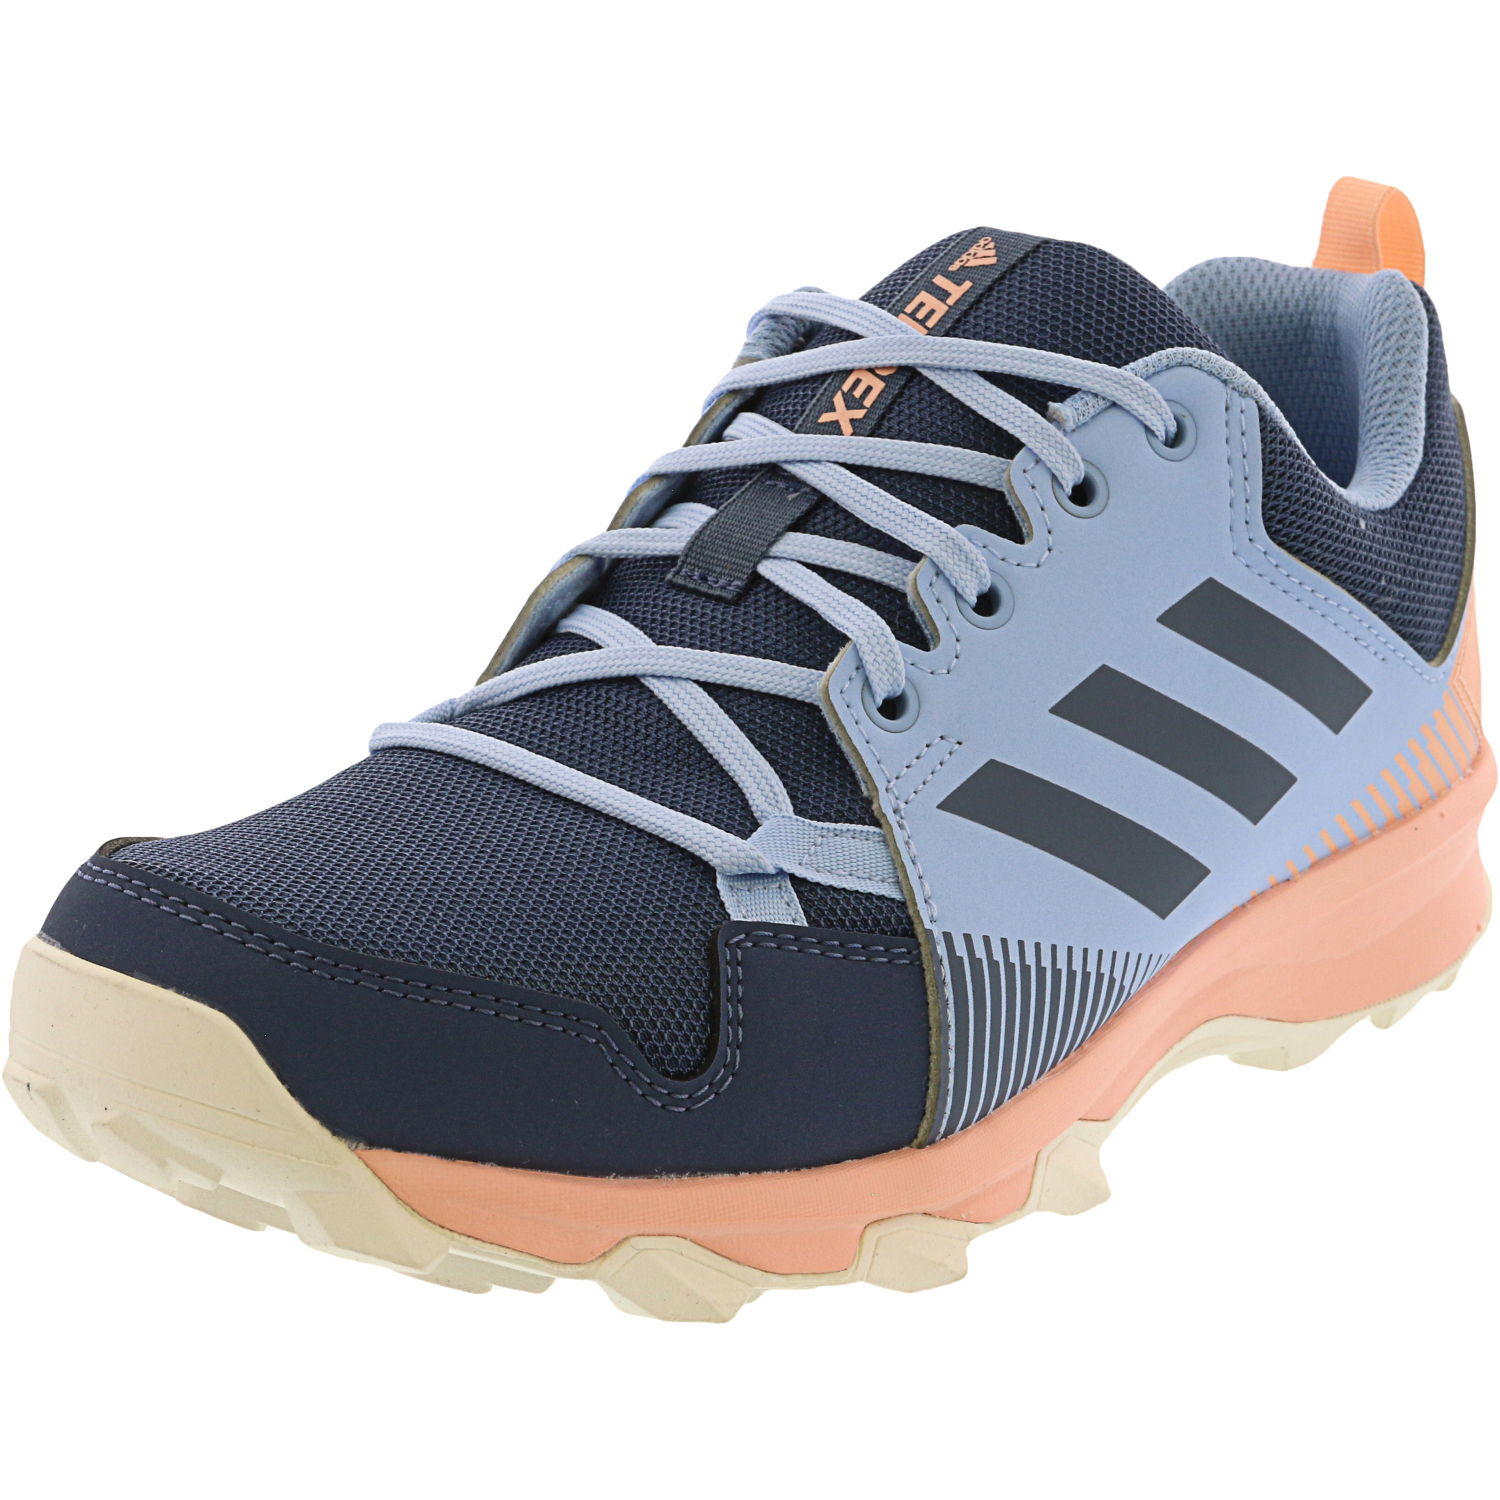 adidas sports shoes at lowest price